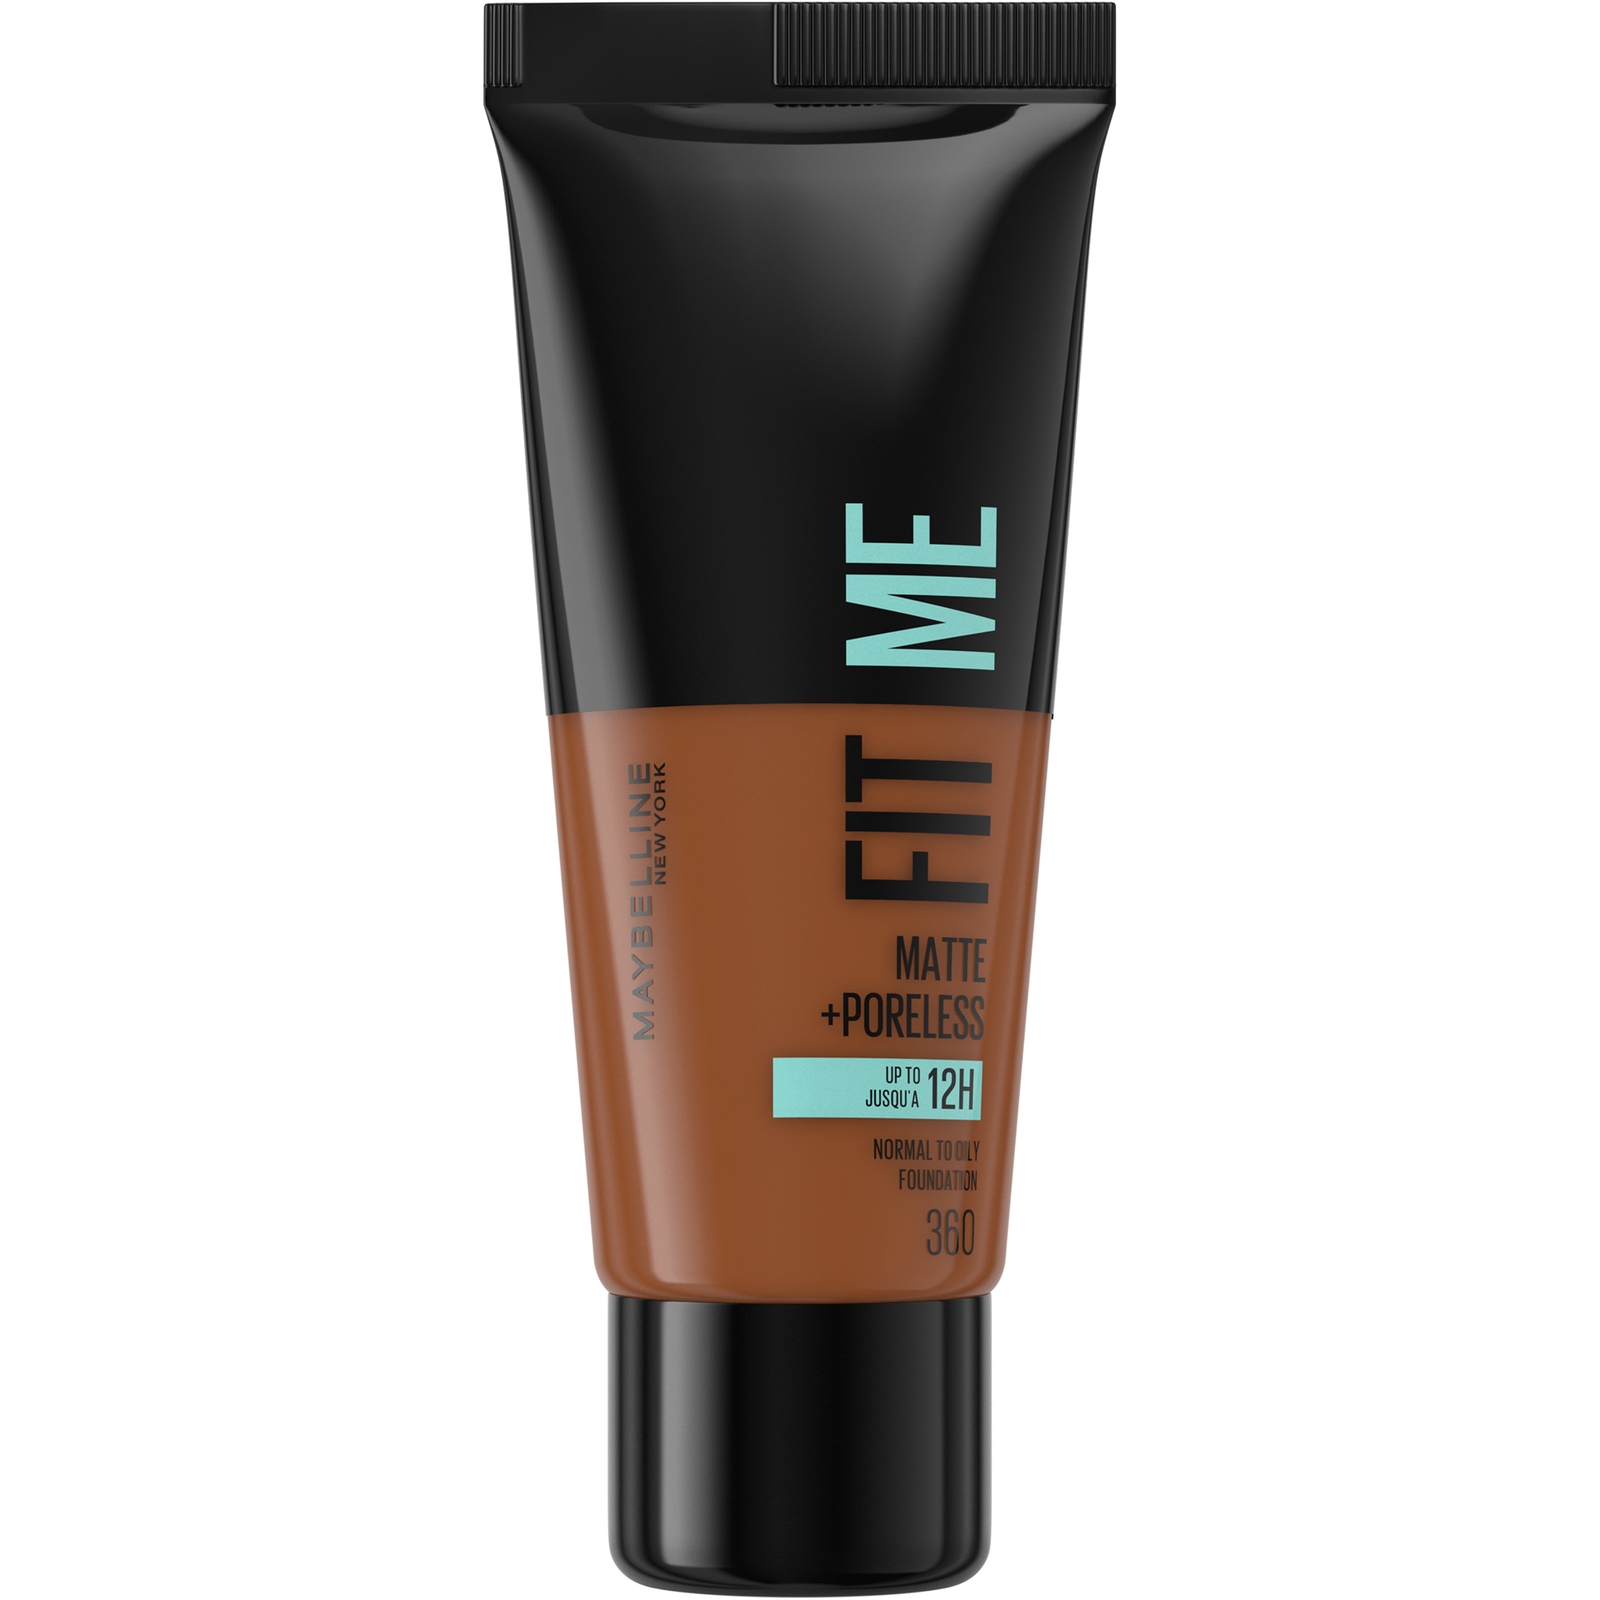 Maybelline Fit Me! Matte and Poreless Foundation 30ml (Various Shades) - 360 Mocha